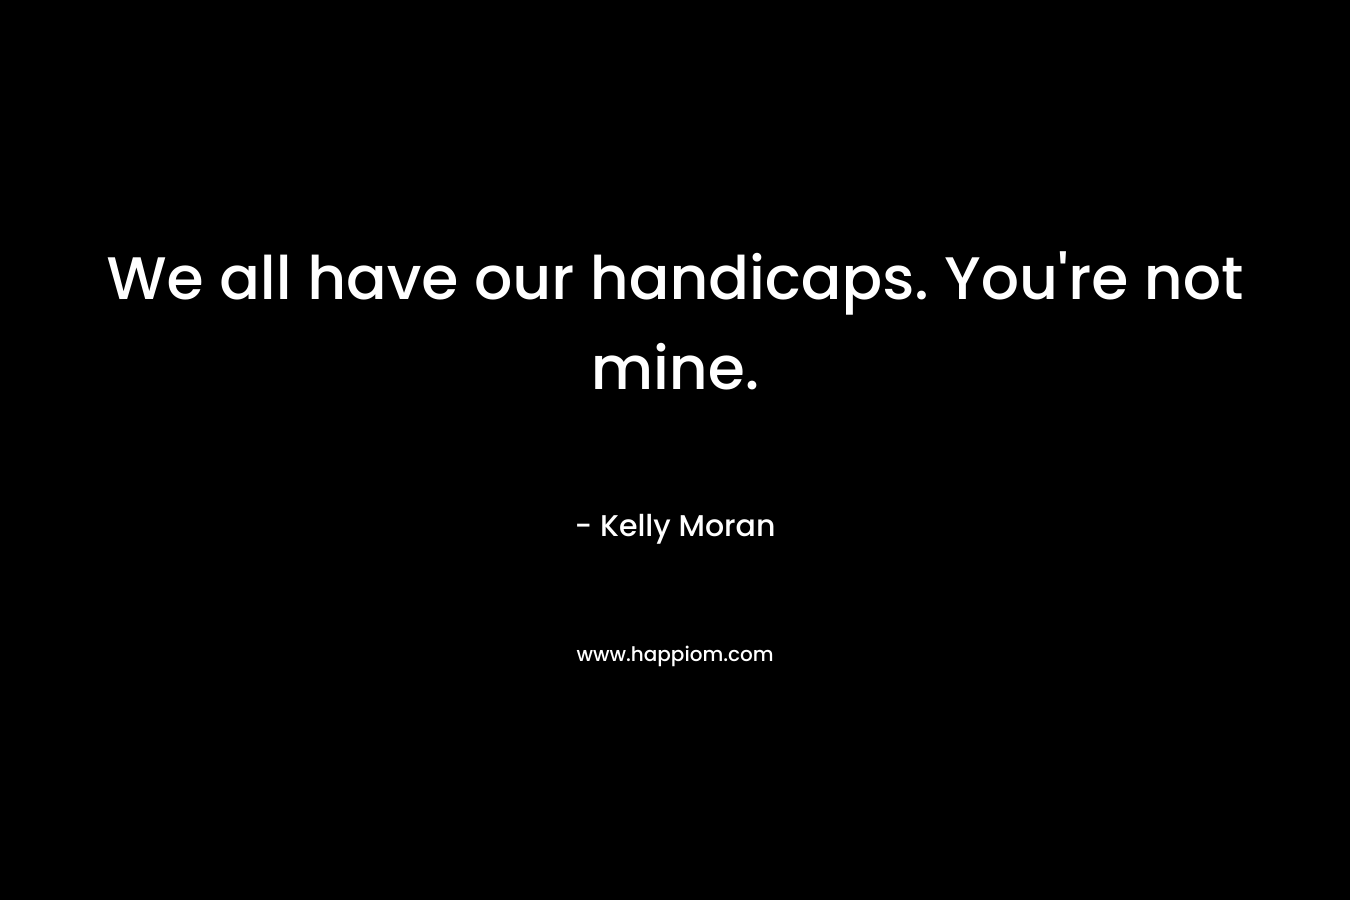 We all have our handicaps. You're not mine.